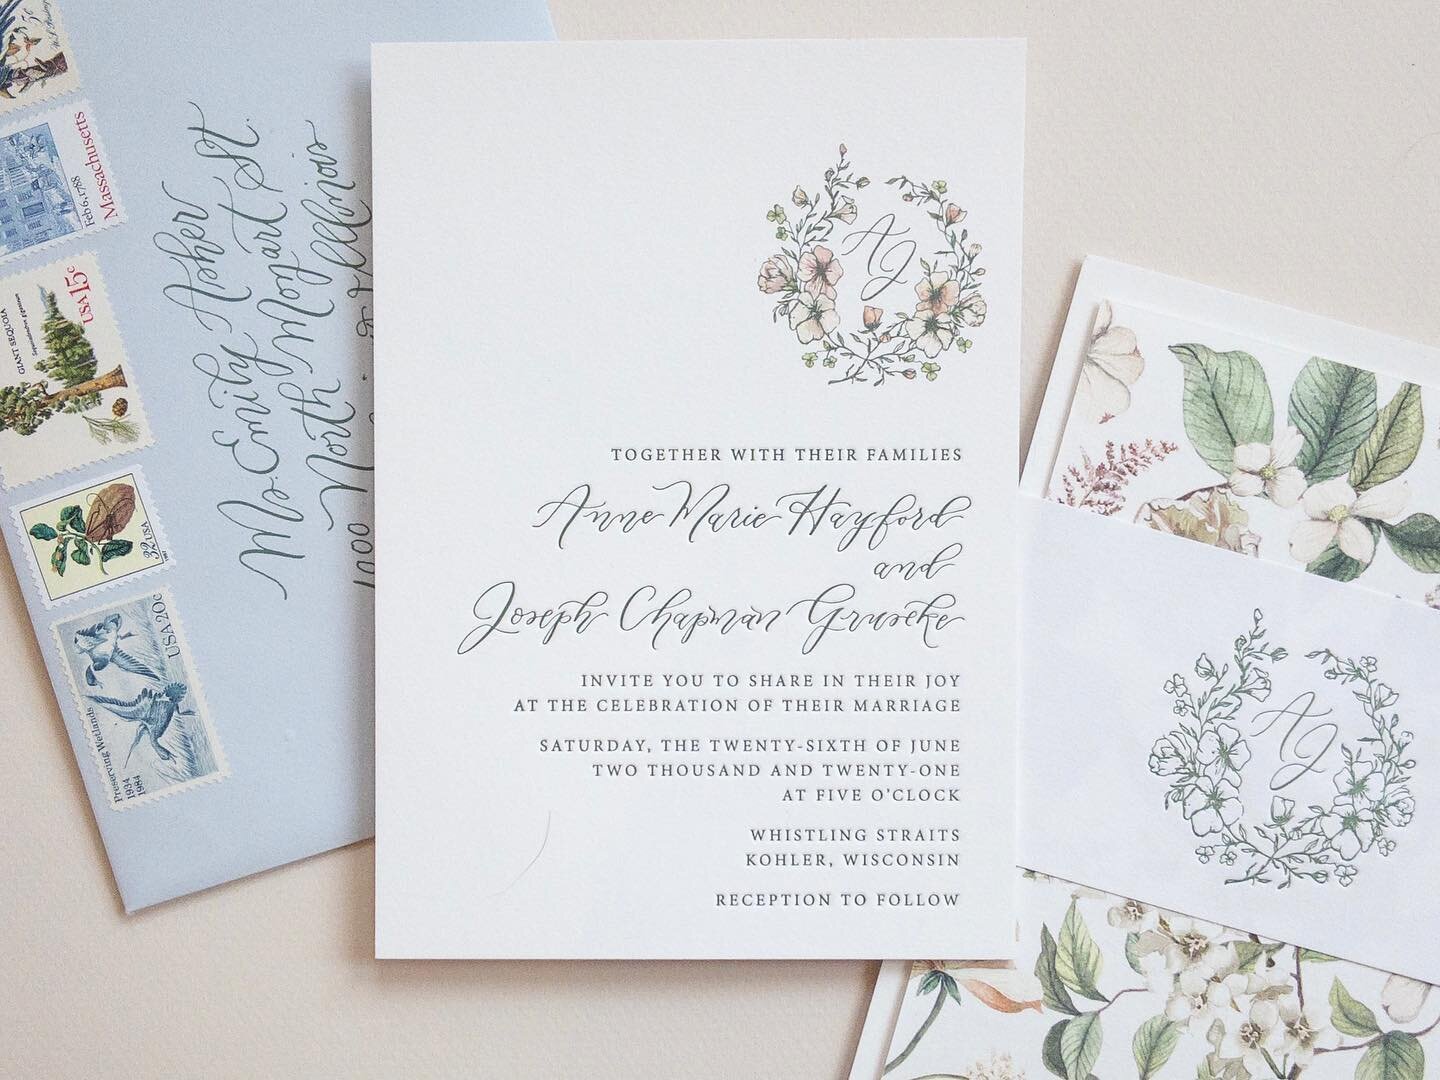 Annie and Joe&rsquo;s wedding at Whistling Straits in Kohler, Wisconsin with @esteraevents was nothing short of dreamy. With vintage stamps, letterpress, and floral illustrations inspired by @kellylenard, who could go wrong?! Can&rsquo;t wait to shar